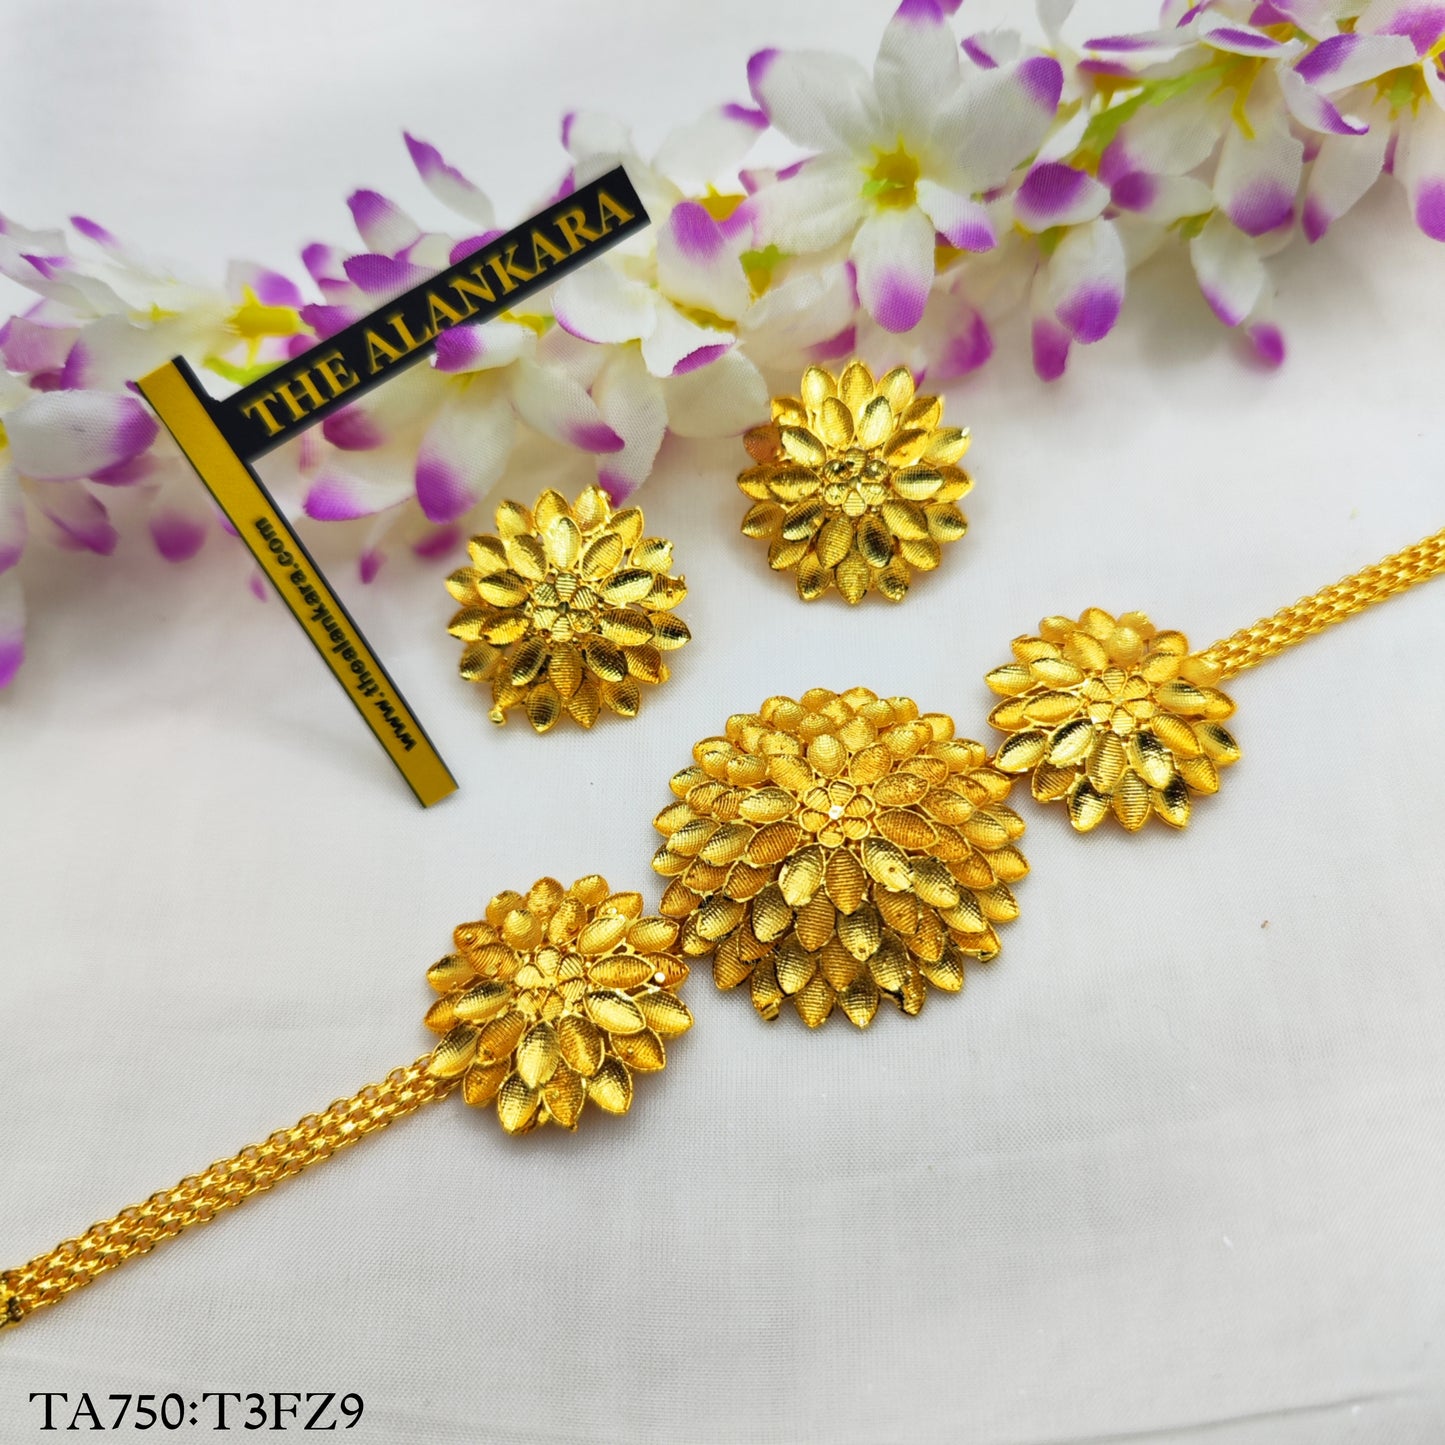 Traditional Sunflower Motif Gold Plated Choker Necklace With Tops Earrings